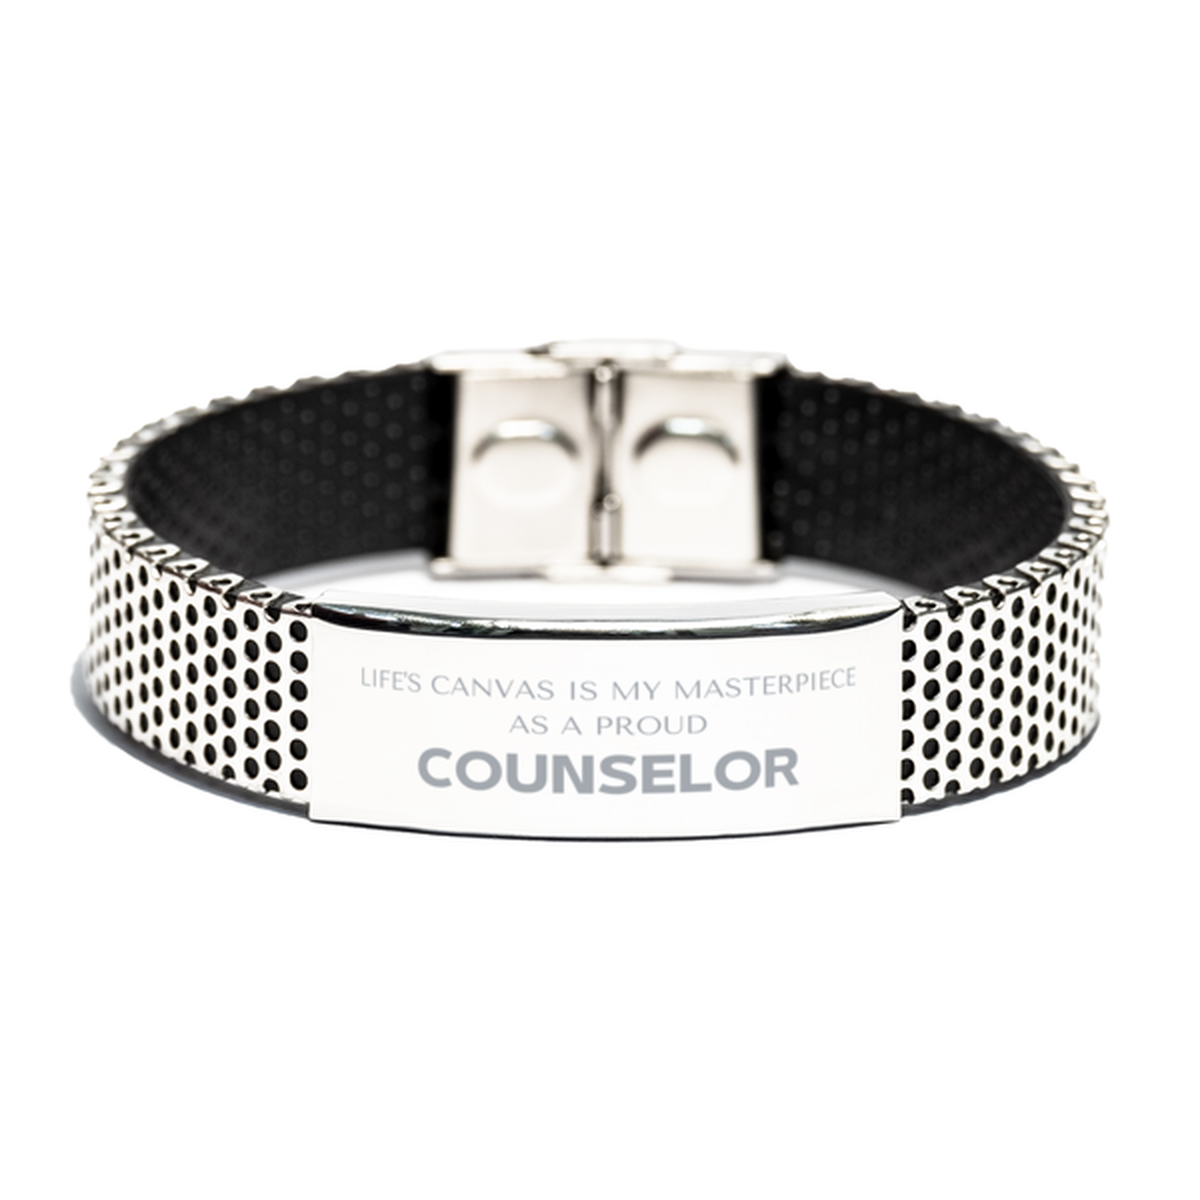 Proud Counselor Gifts, Life's canvas is my masterpiece, Epic Birthday Christmas Unique Stainless Steel Bracelet For Counselor, Coworkers, Men, Women, Friends